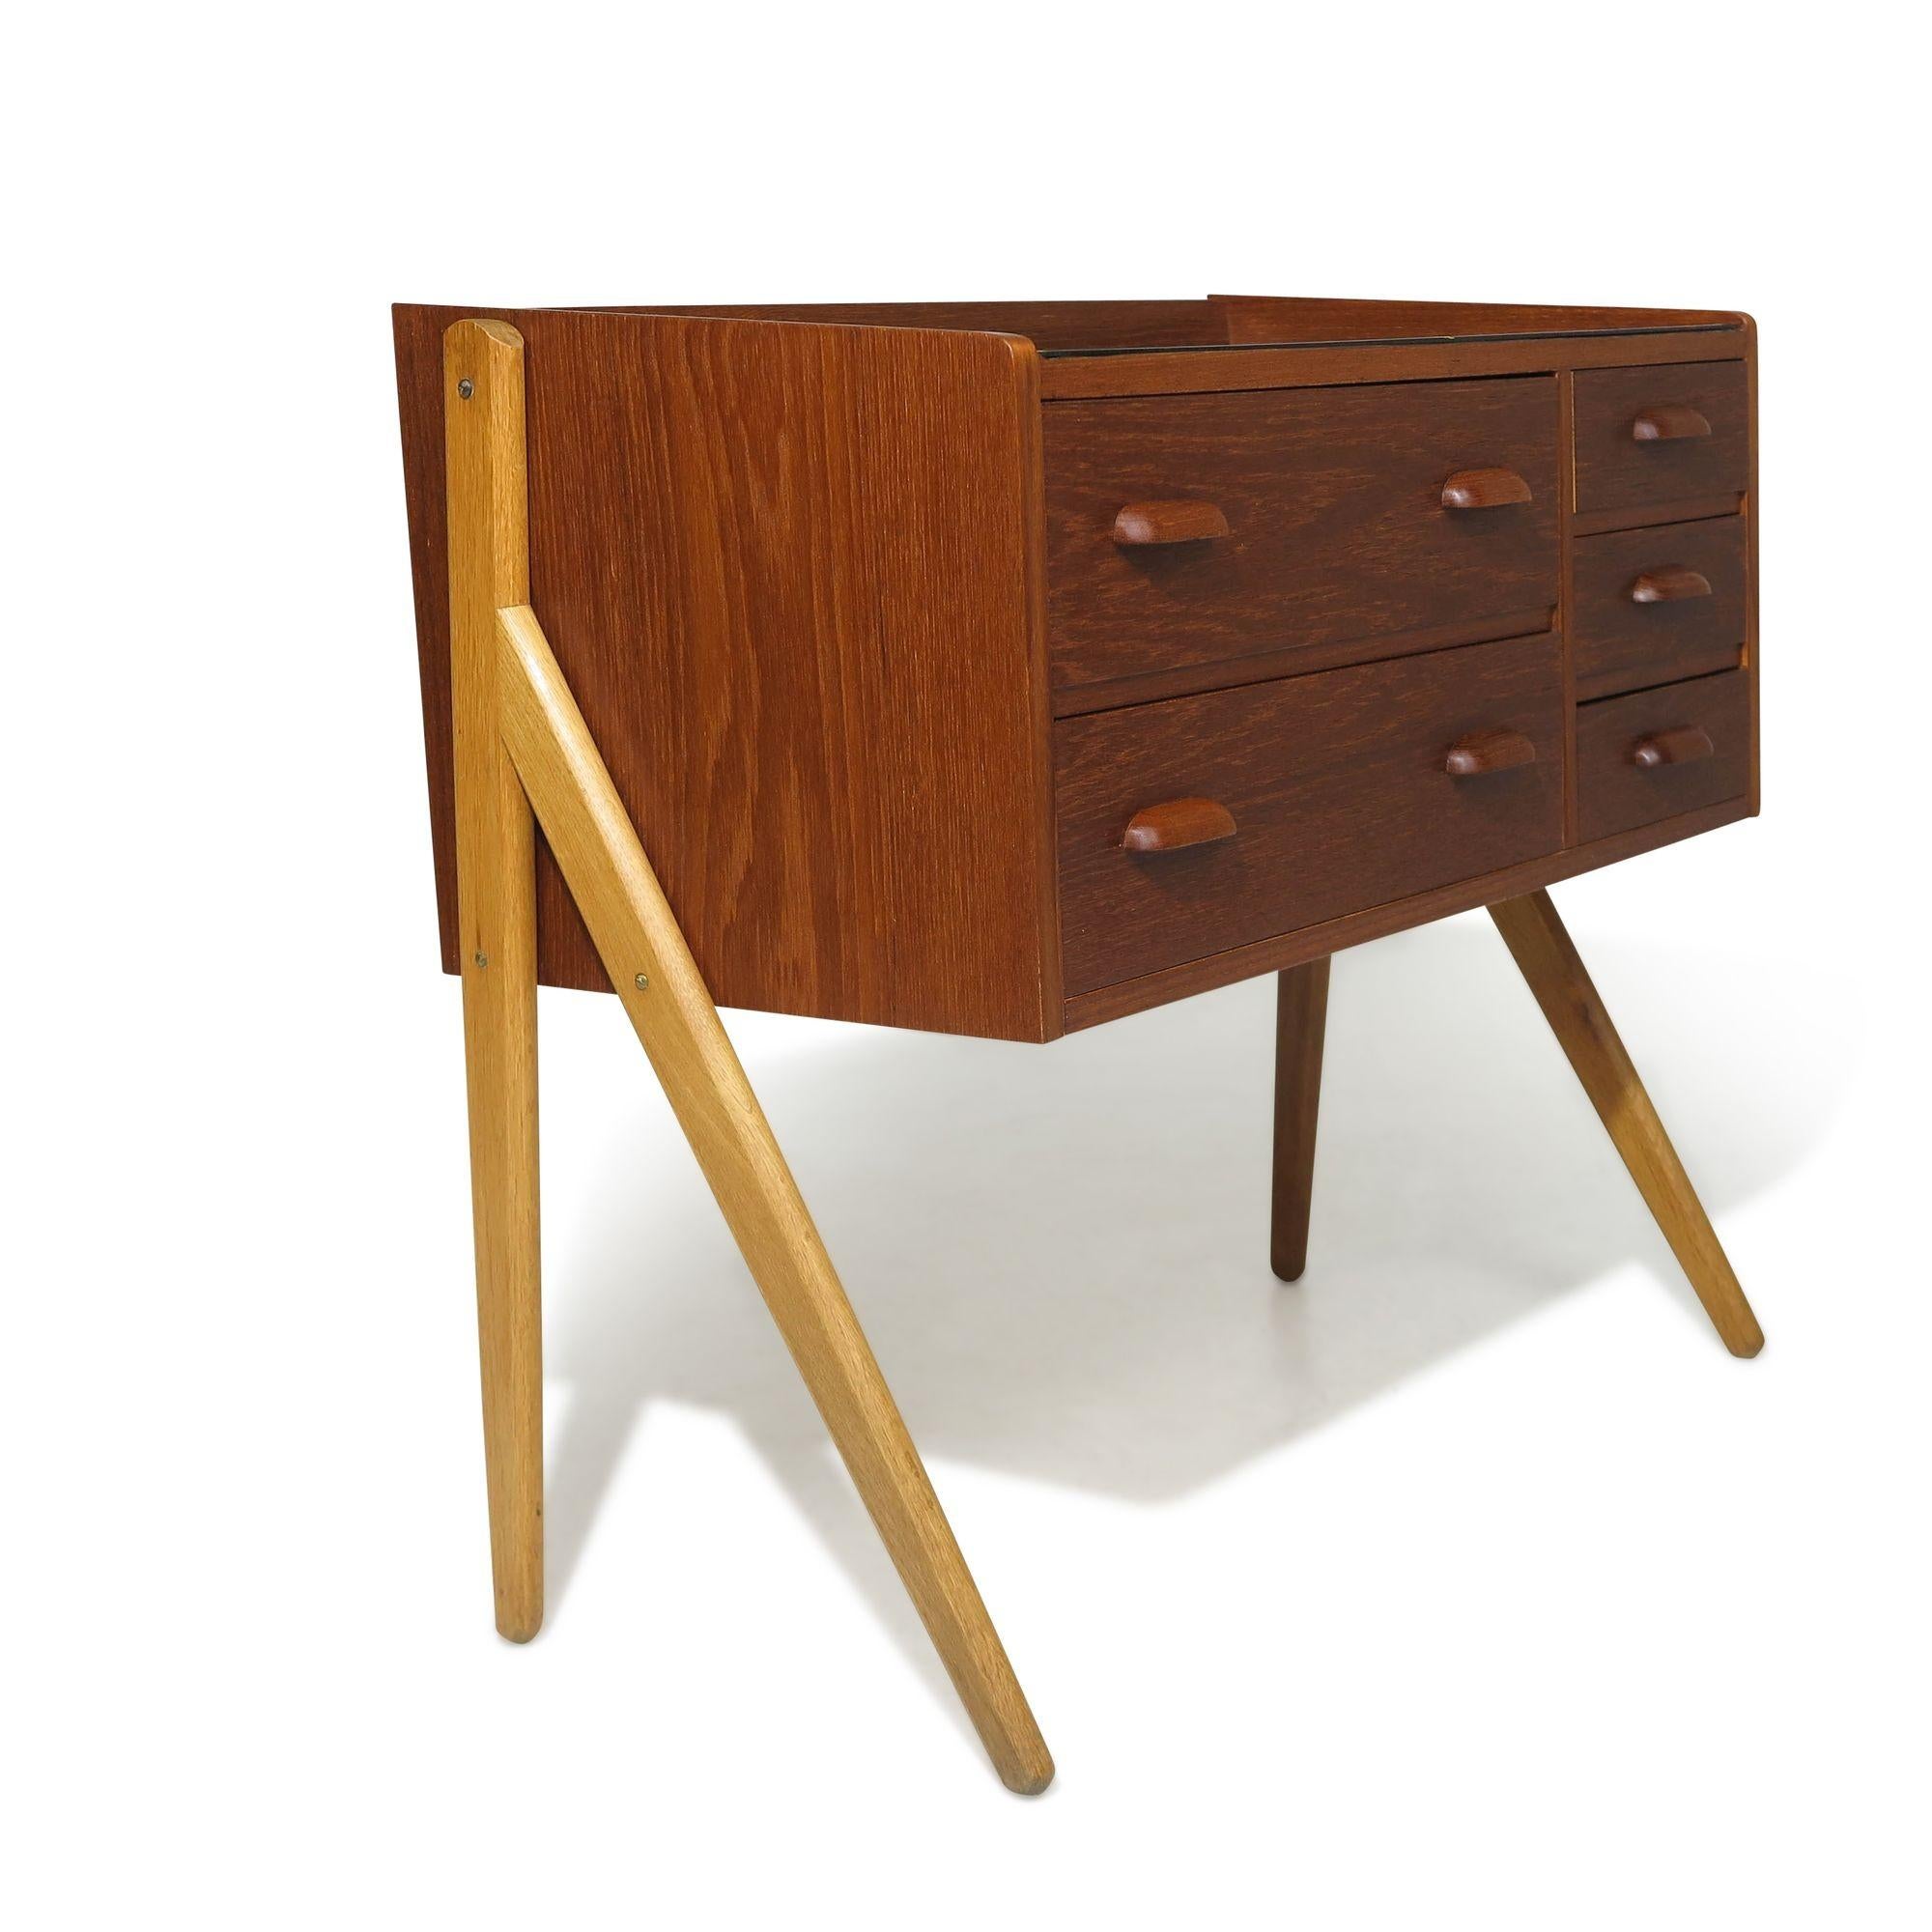 Mid-century Danish Sigfred Omann Teak Nightstand Cabinet In Good Condition For Sale In Oakland, CA